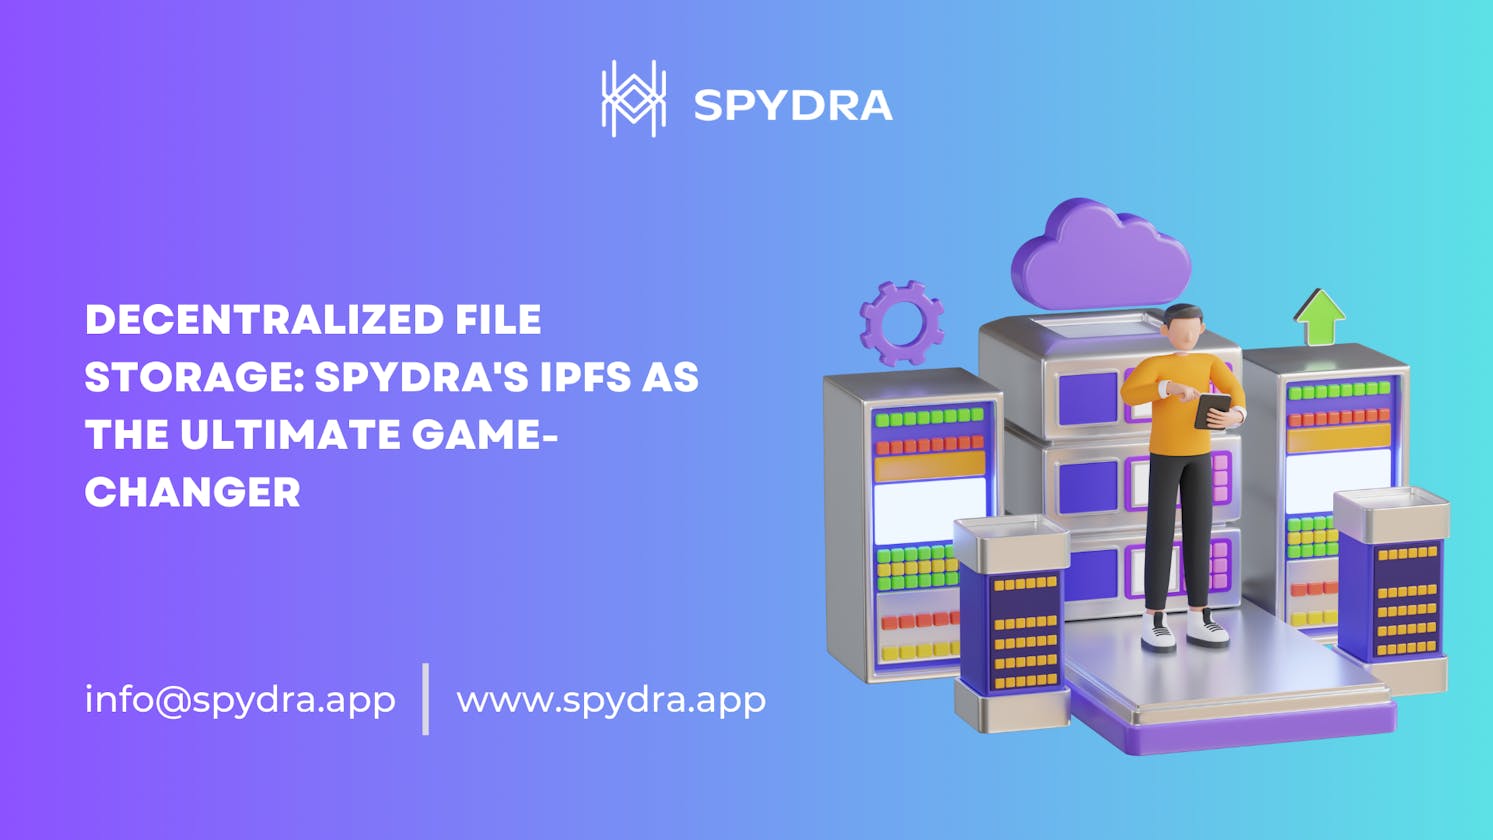 Decentralized File Storage: Spydra's IPFS as the Ultimate Game-Changer